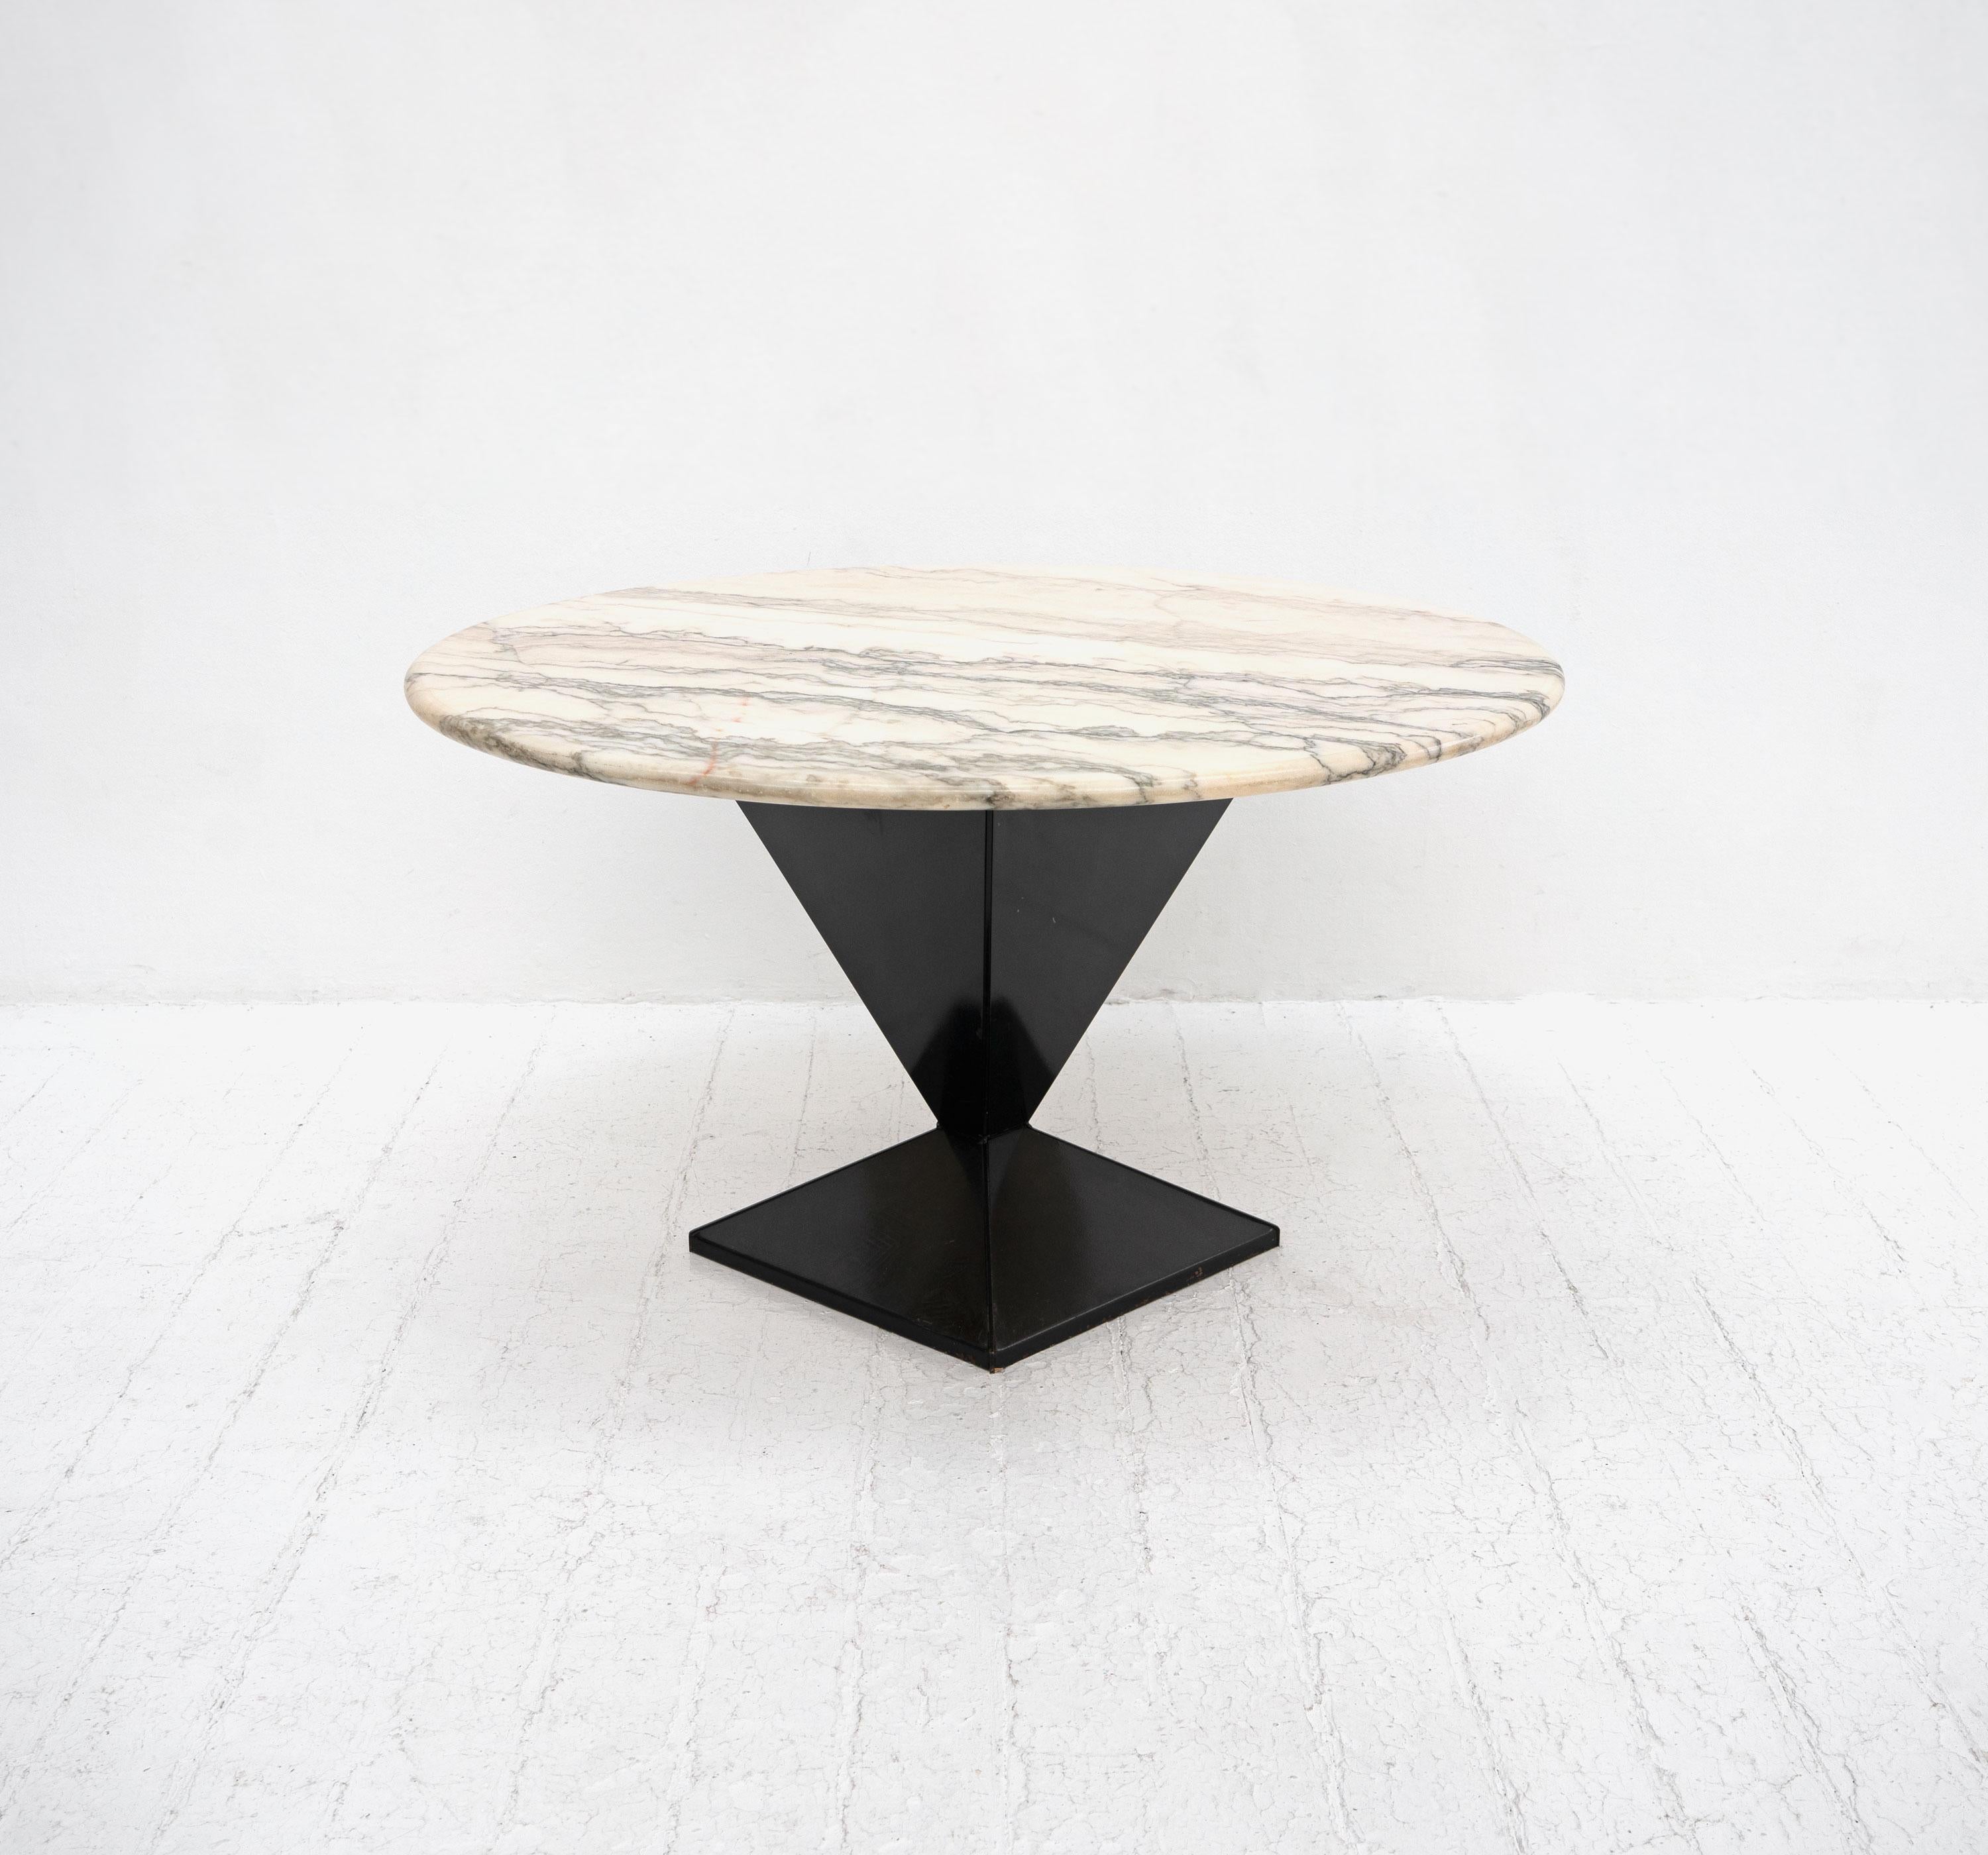 A mid-late 20th Century dining table composed from a prismatic lacquered metal base supporting a circular Calacatta marble top with grey and amber veins.

Dimensions (cm, approx):
Height: 73
Diameter: 130

Condition: The marble is in very good